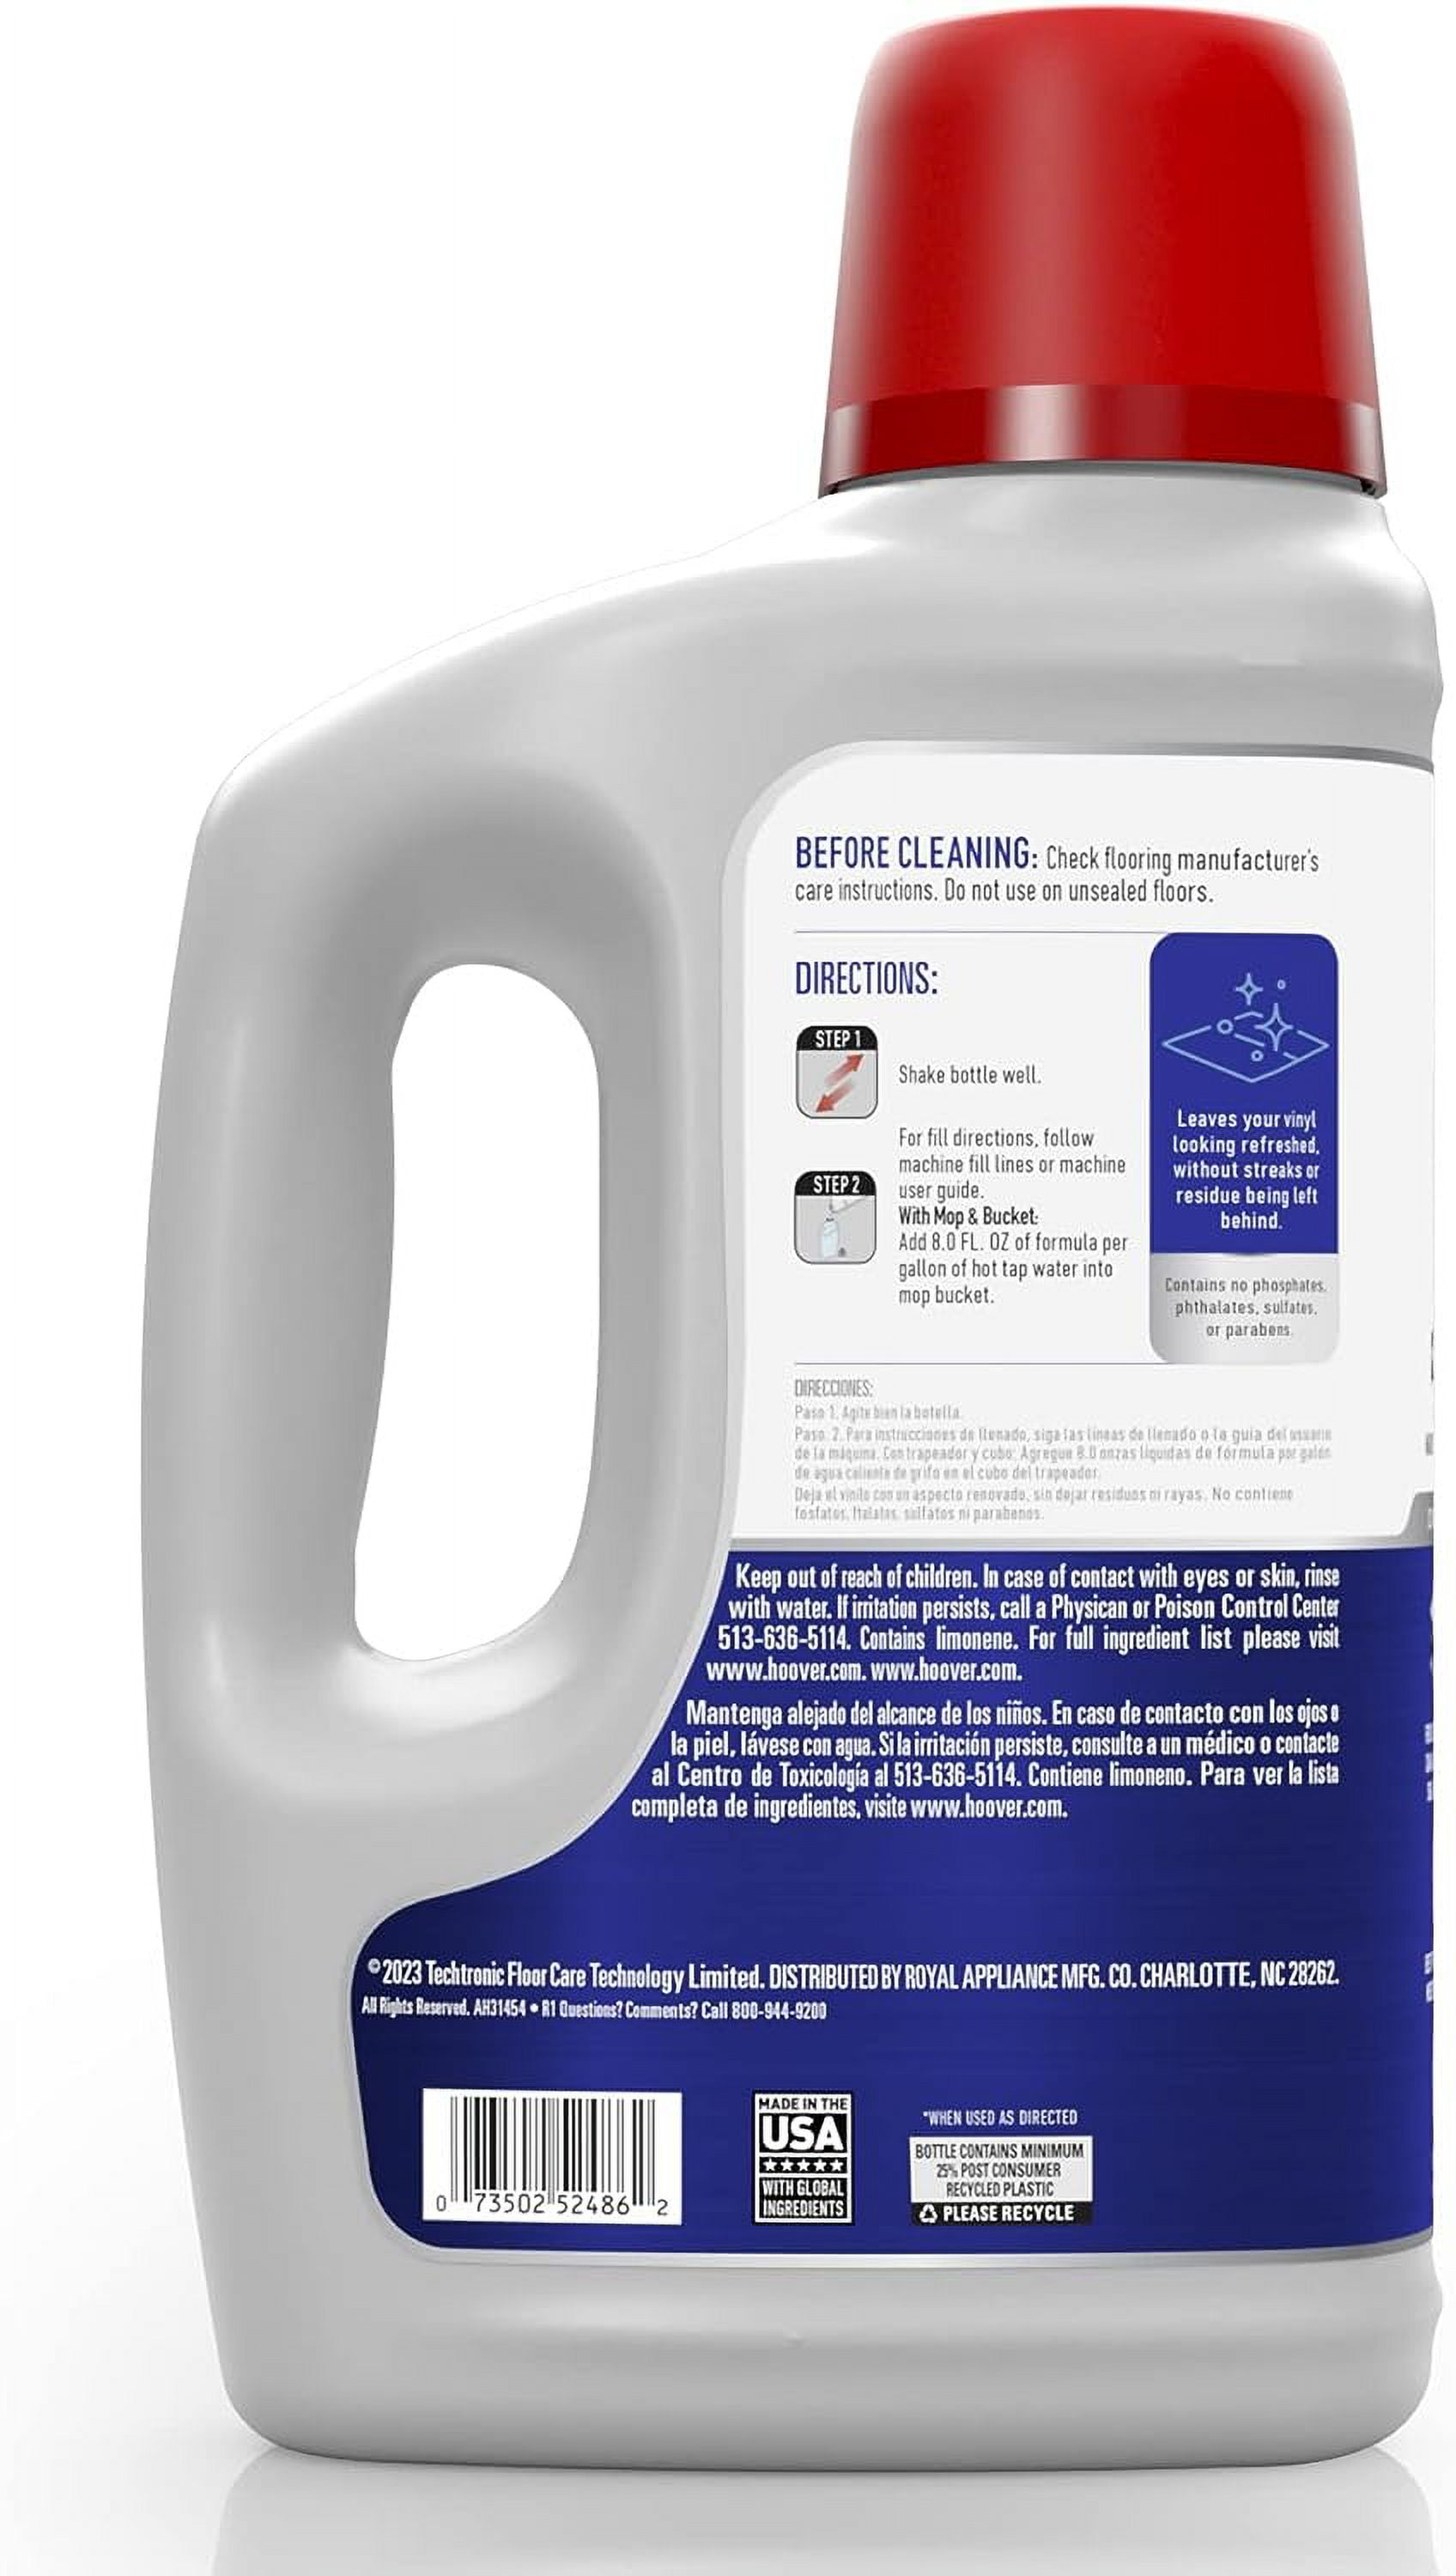 Hoover Renewal Luxury Vinyl Floor Cleaner Concentrated Cleaning Solution for Hard Floor Machines 32oz Formula Ah31434 White